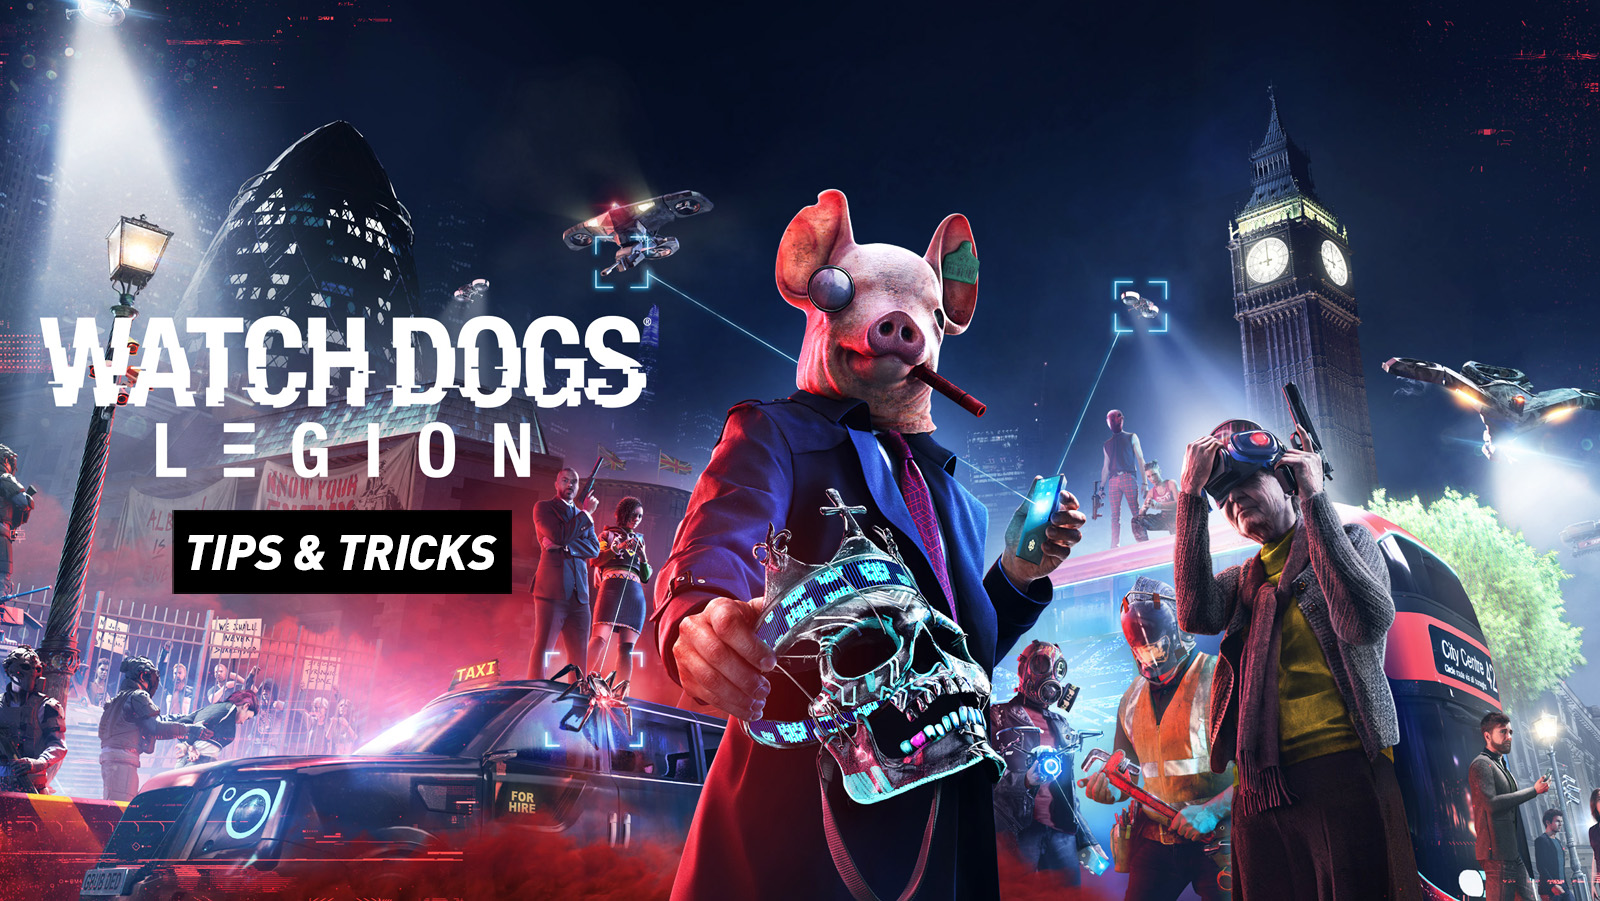 Tips for Watch Dogs Legion